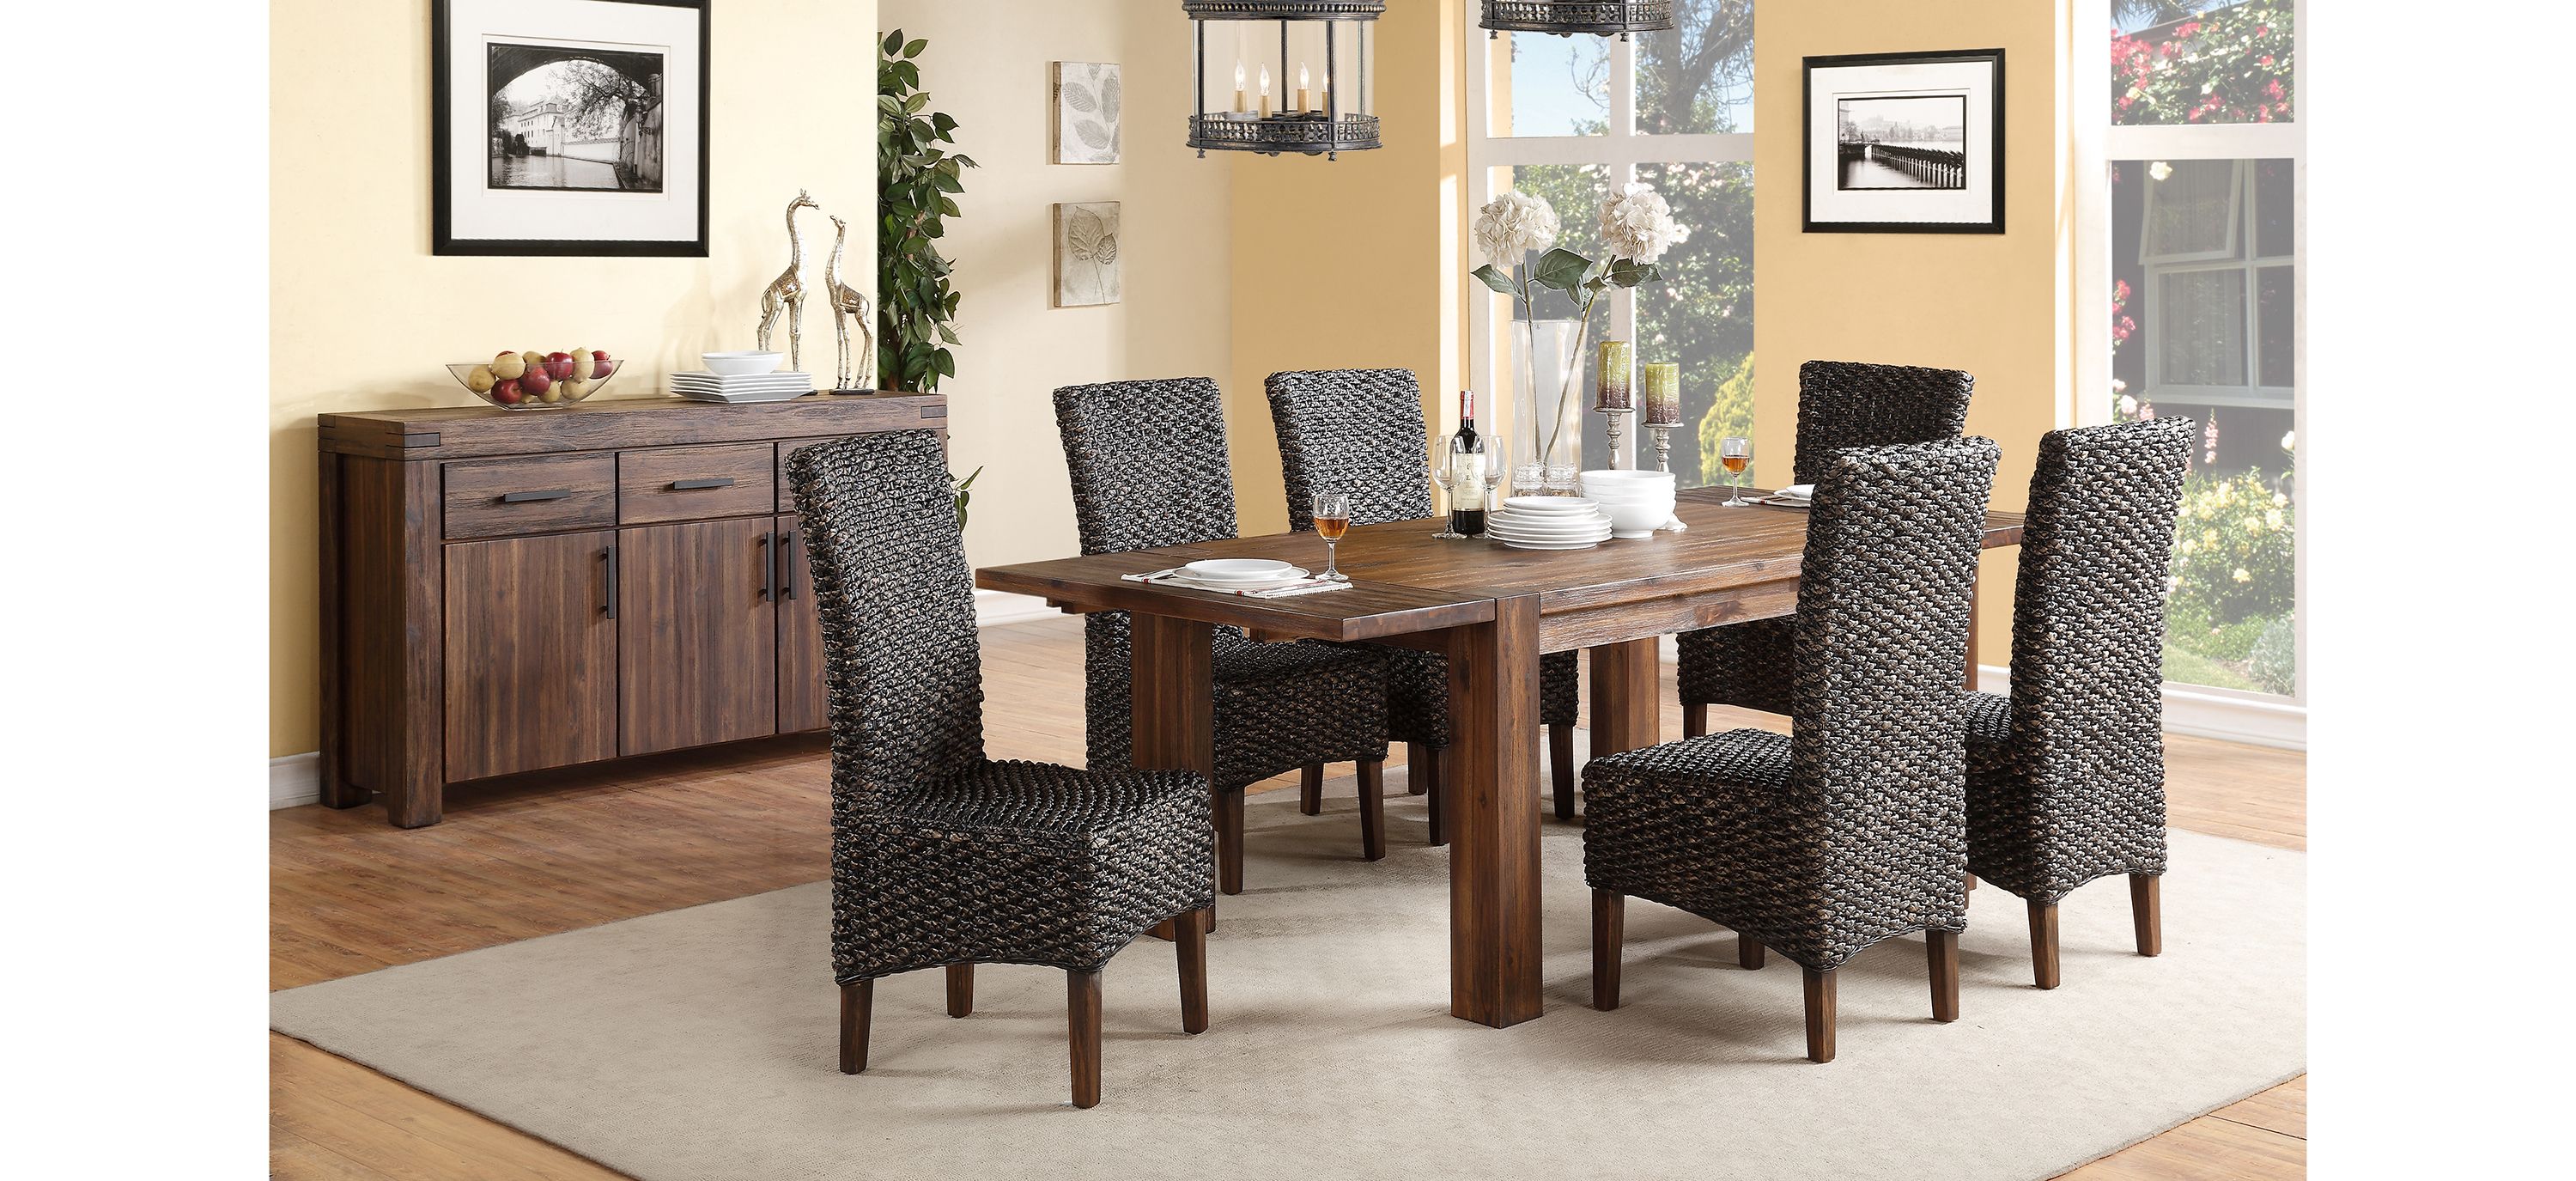 Middlefield 7-pc. Dining Set w/ Woven Chairs